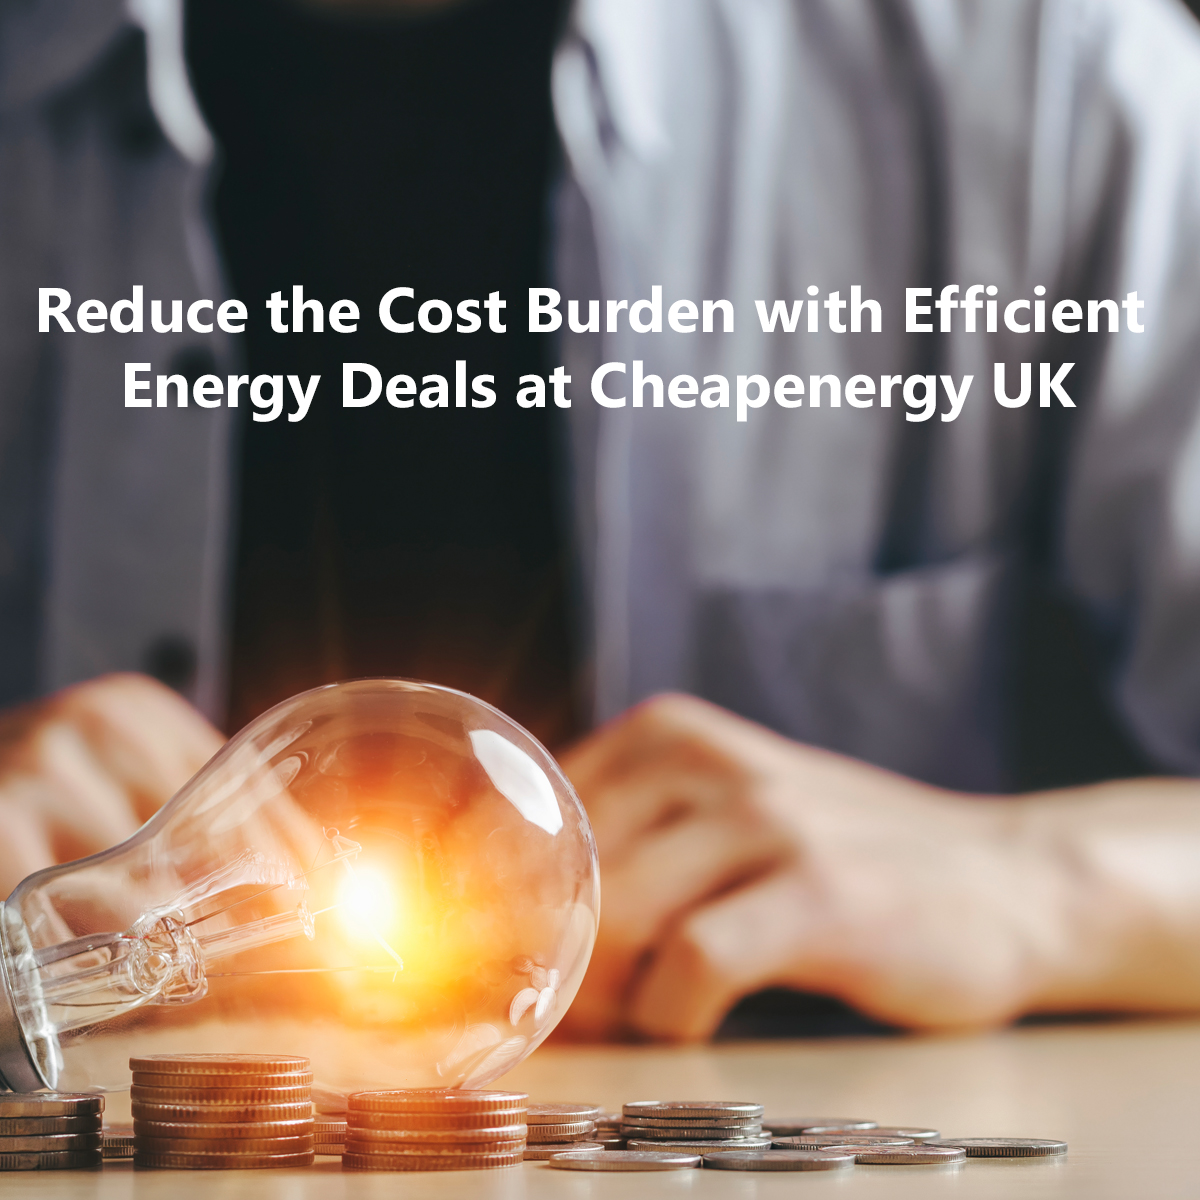 Cheap Energy UK can help you reduce the cost of your average household energy bills. The more services you take the more you reduce your energy bills. For more Details Call us now.
#energyefficient #reducebills #energysupplier #lowerbills #savemoney #lowercosts #supplier